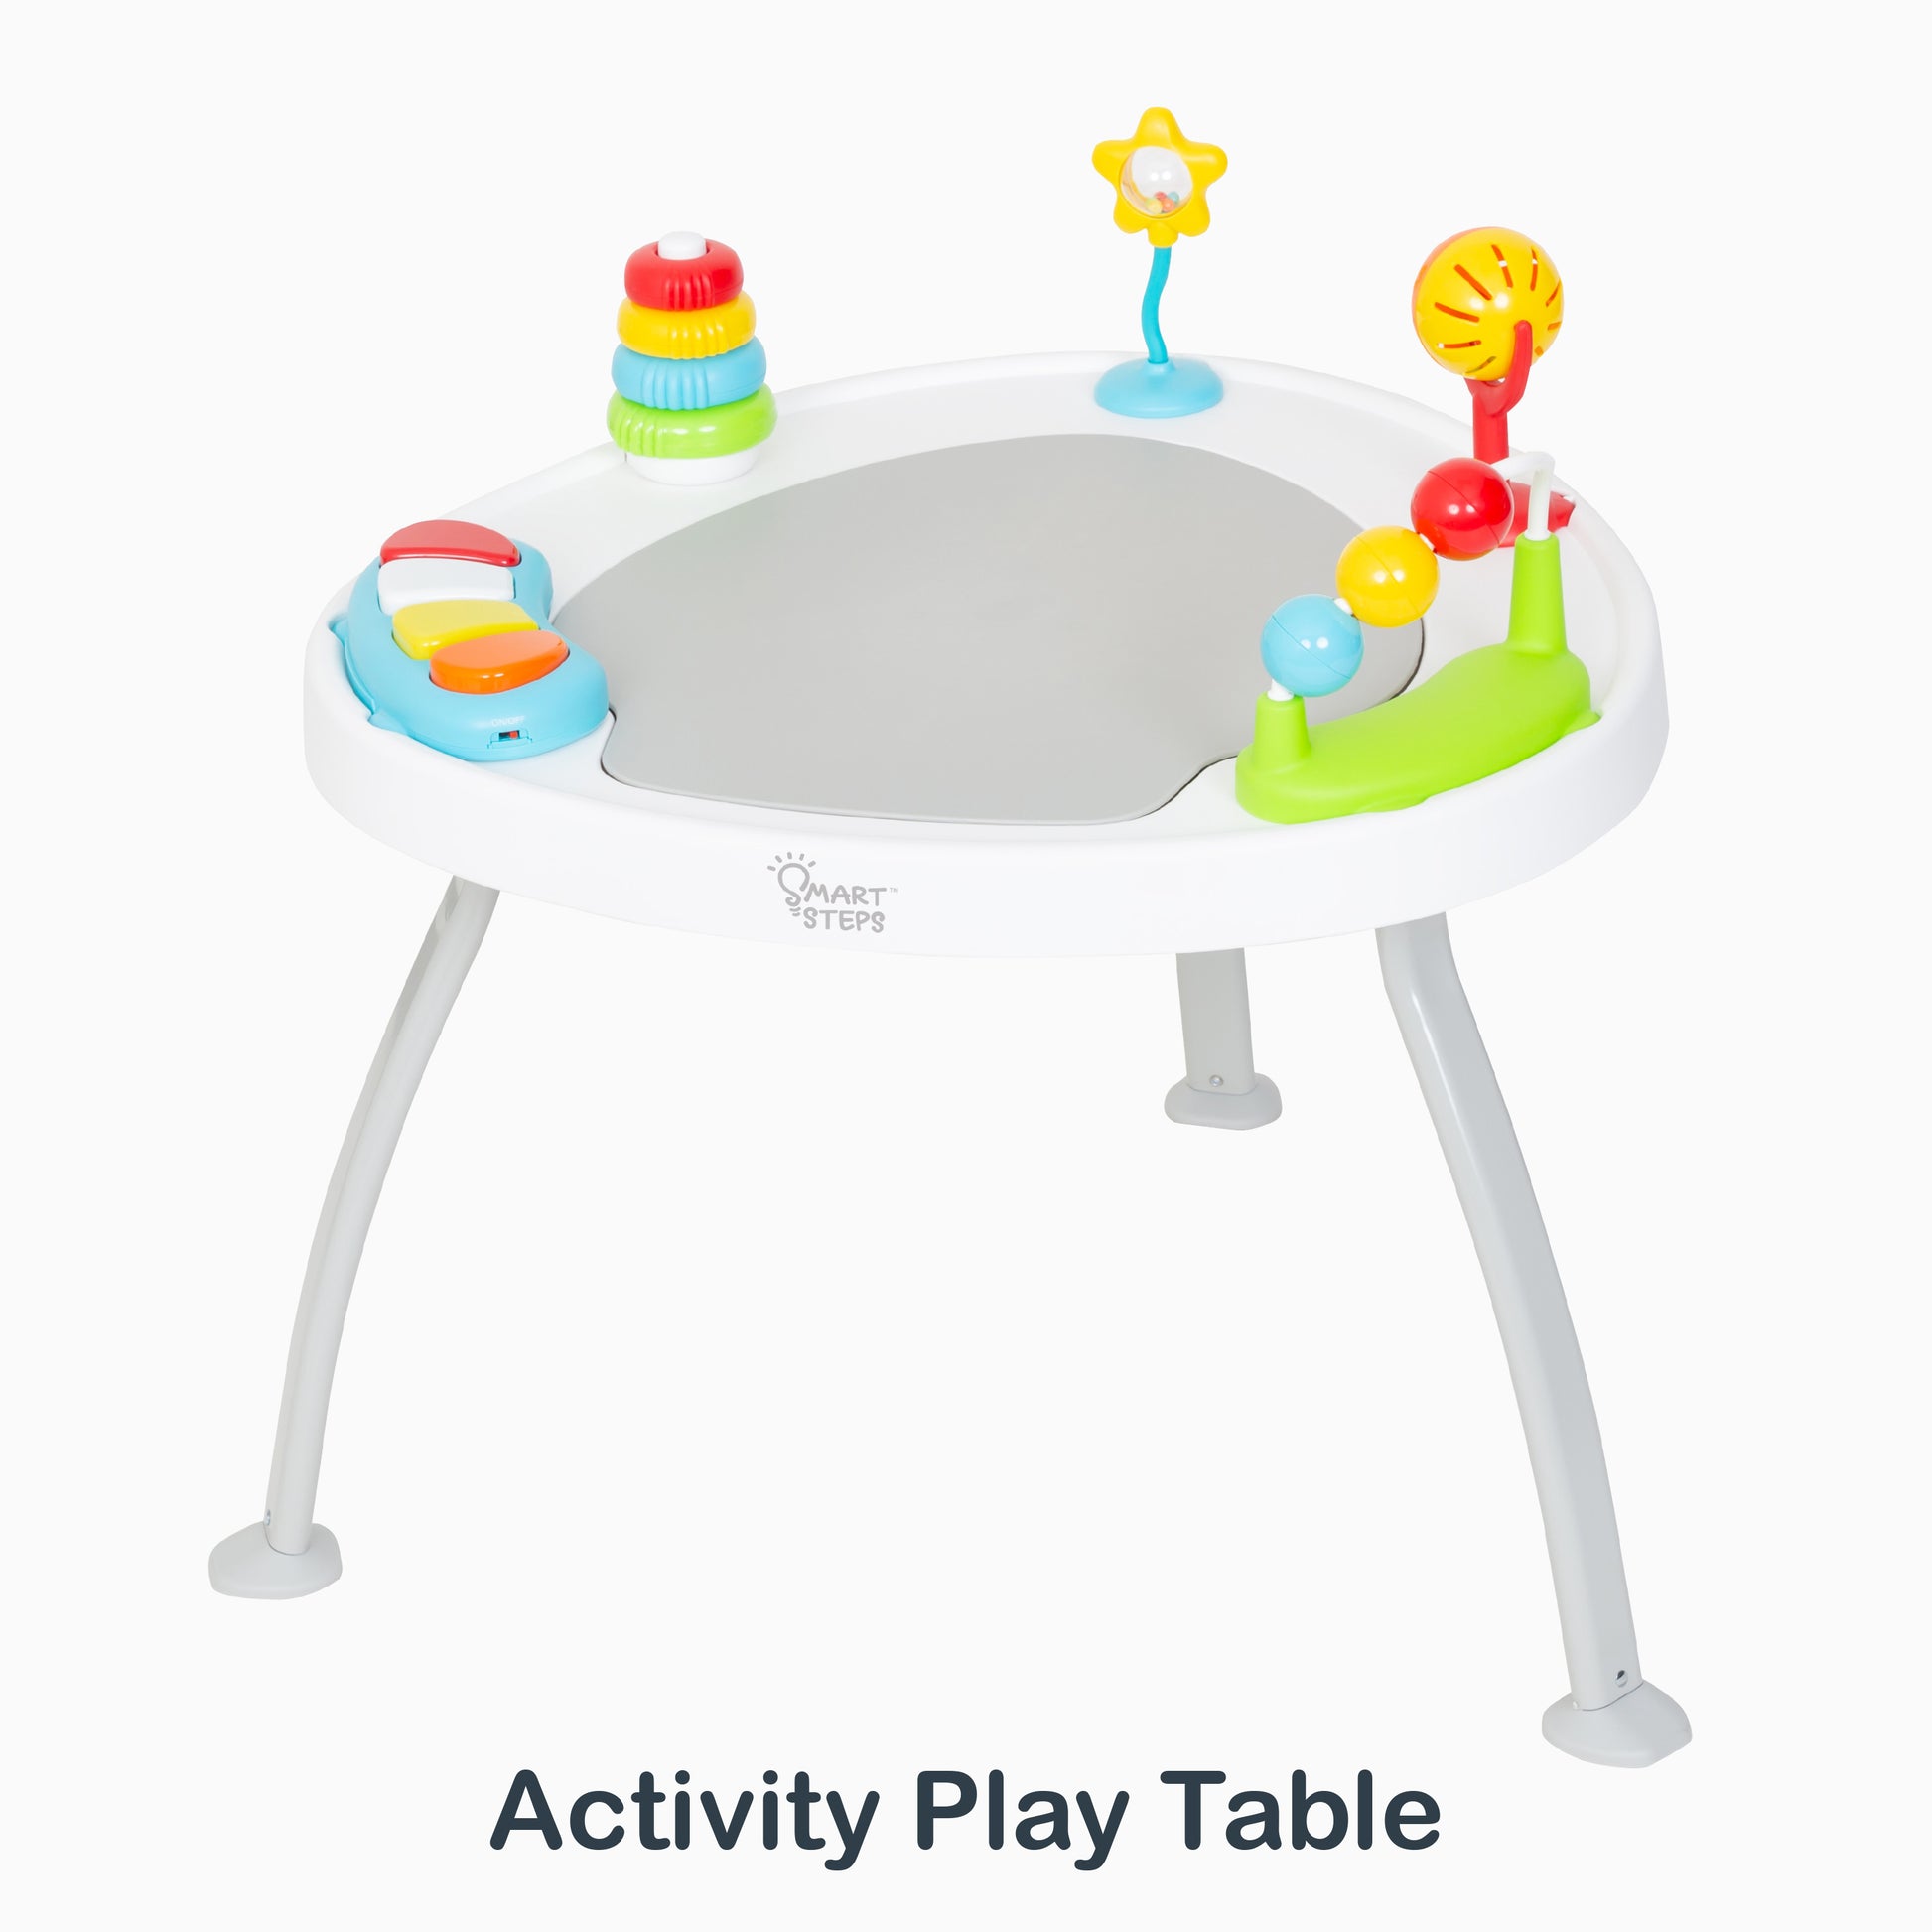 Activity play table of the Smart Steps by Baby Trend Bounce N’ Play 3-in-1 Activity Center